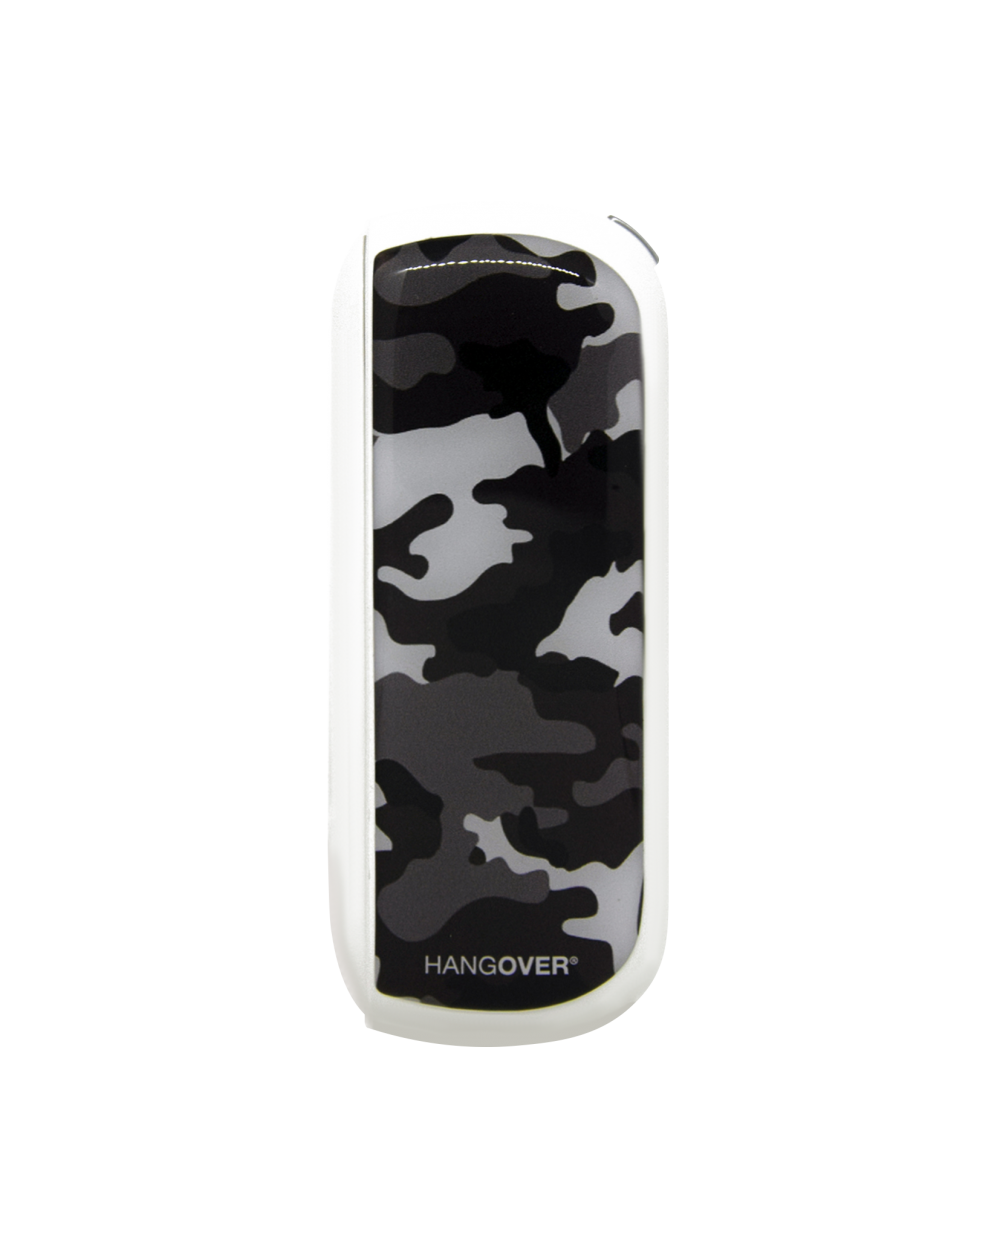 Military Black Hangover Cover Smartskin In Special Resin For Iqos 3